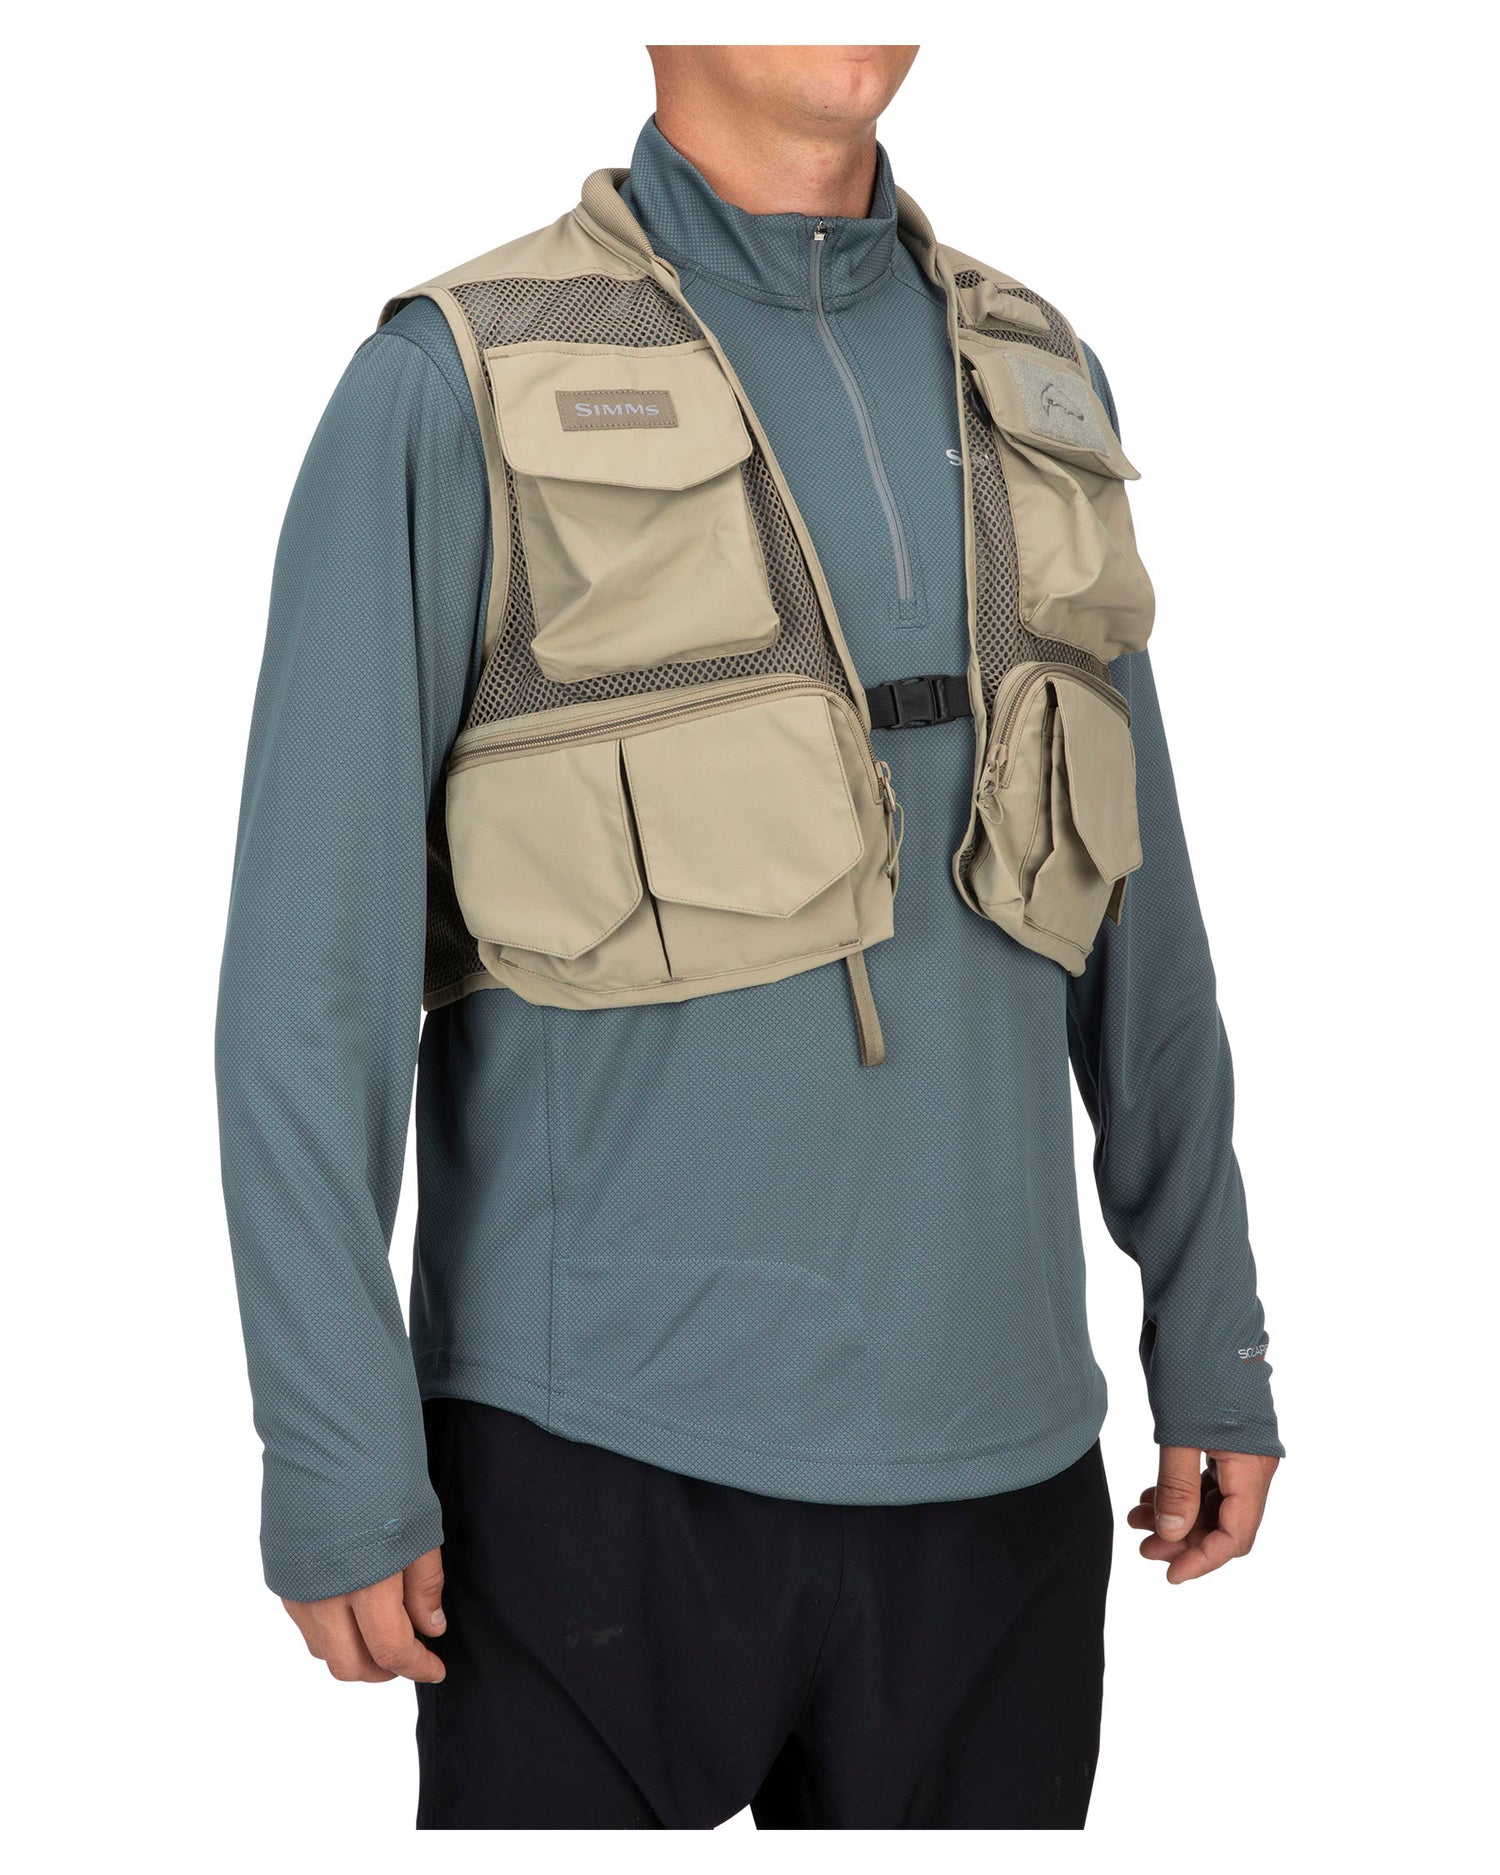 Tributary Fishing Vest | Simms Fishing Products